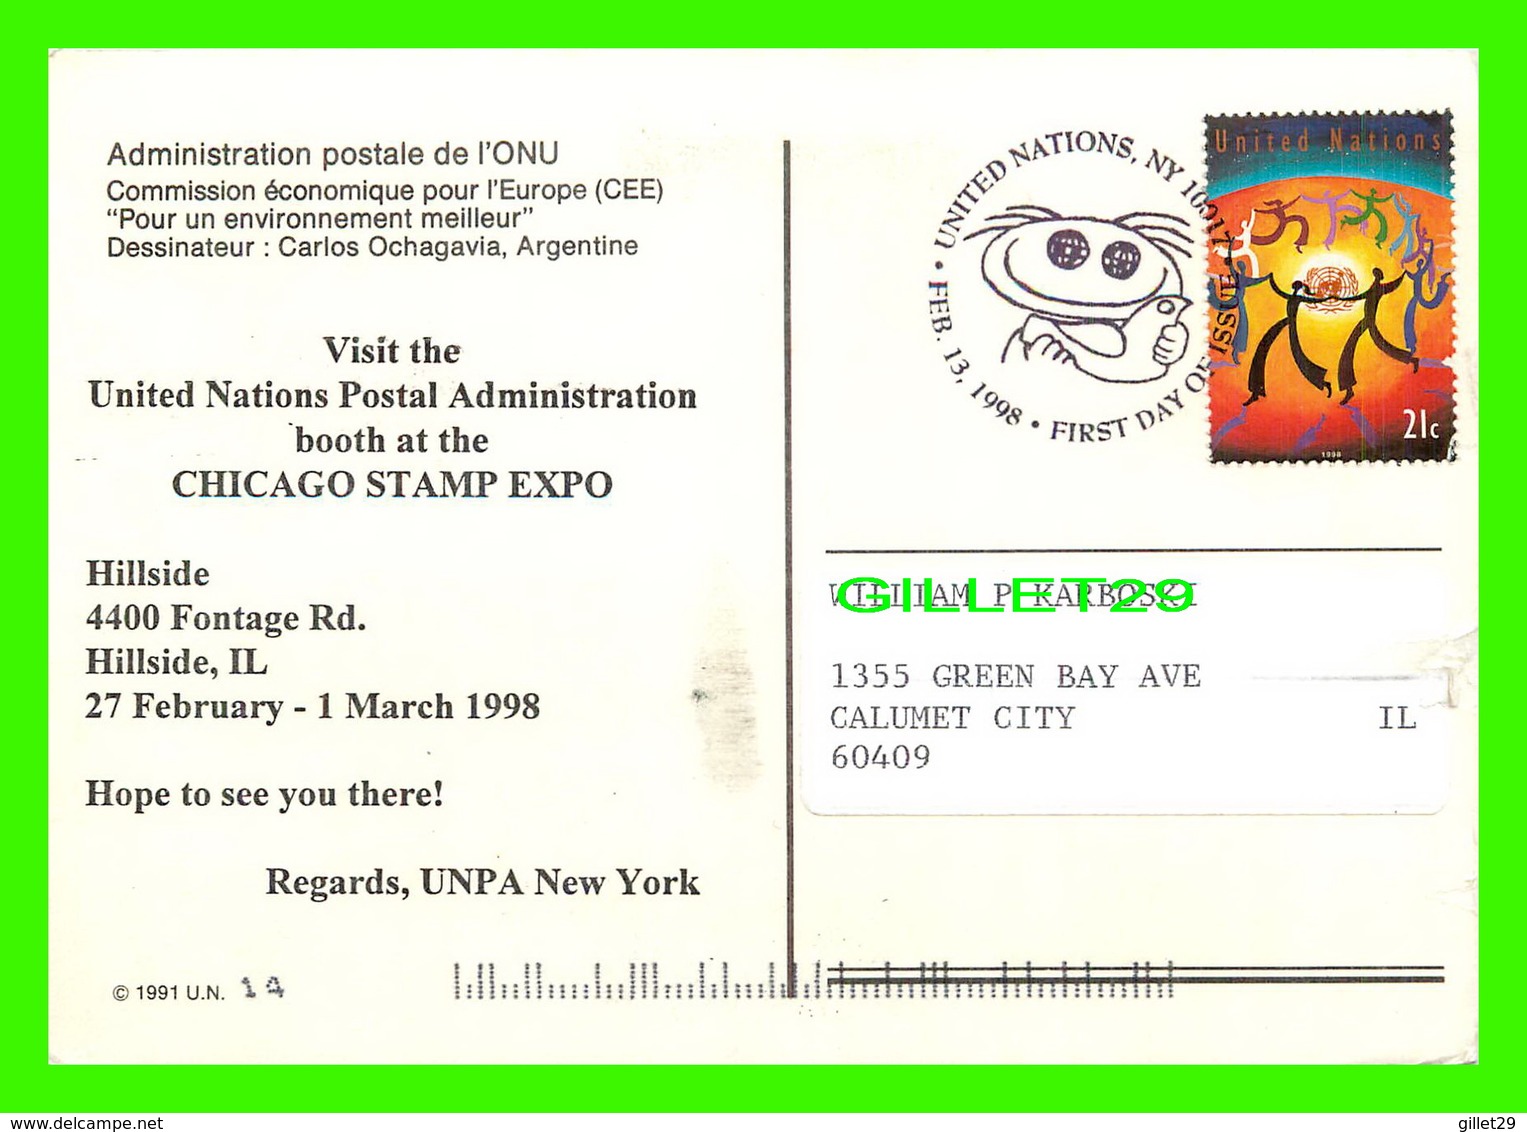 OISEAUX - UNITED NATIONS POSTALE ADMINISTRATION - DESSIN OF CARLOS OCHAGAVIA, ARGENTINE - TRAVEL IN 1998 - - Vogels